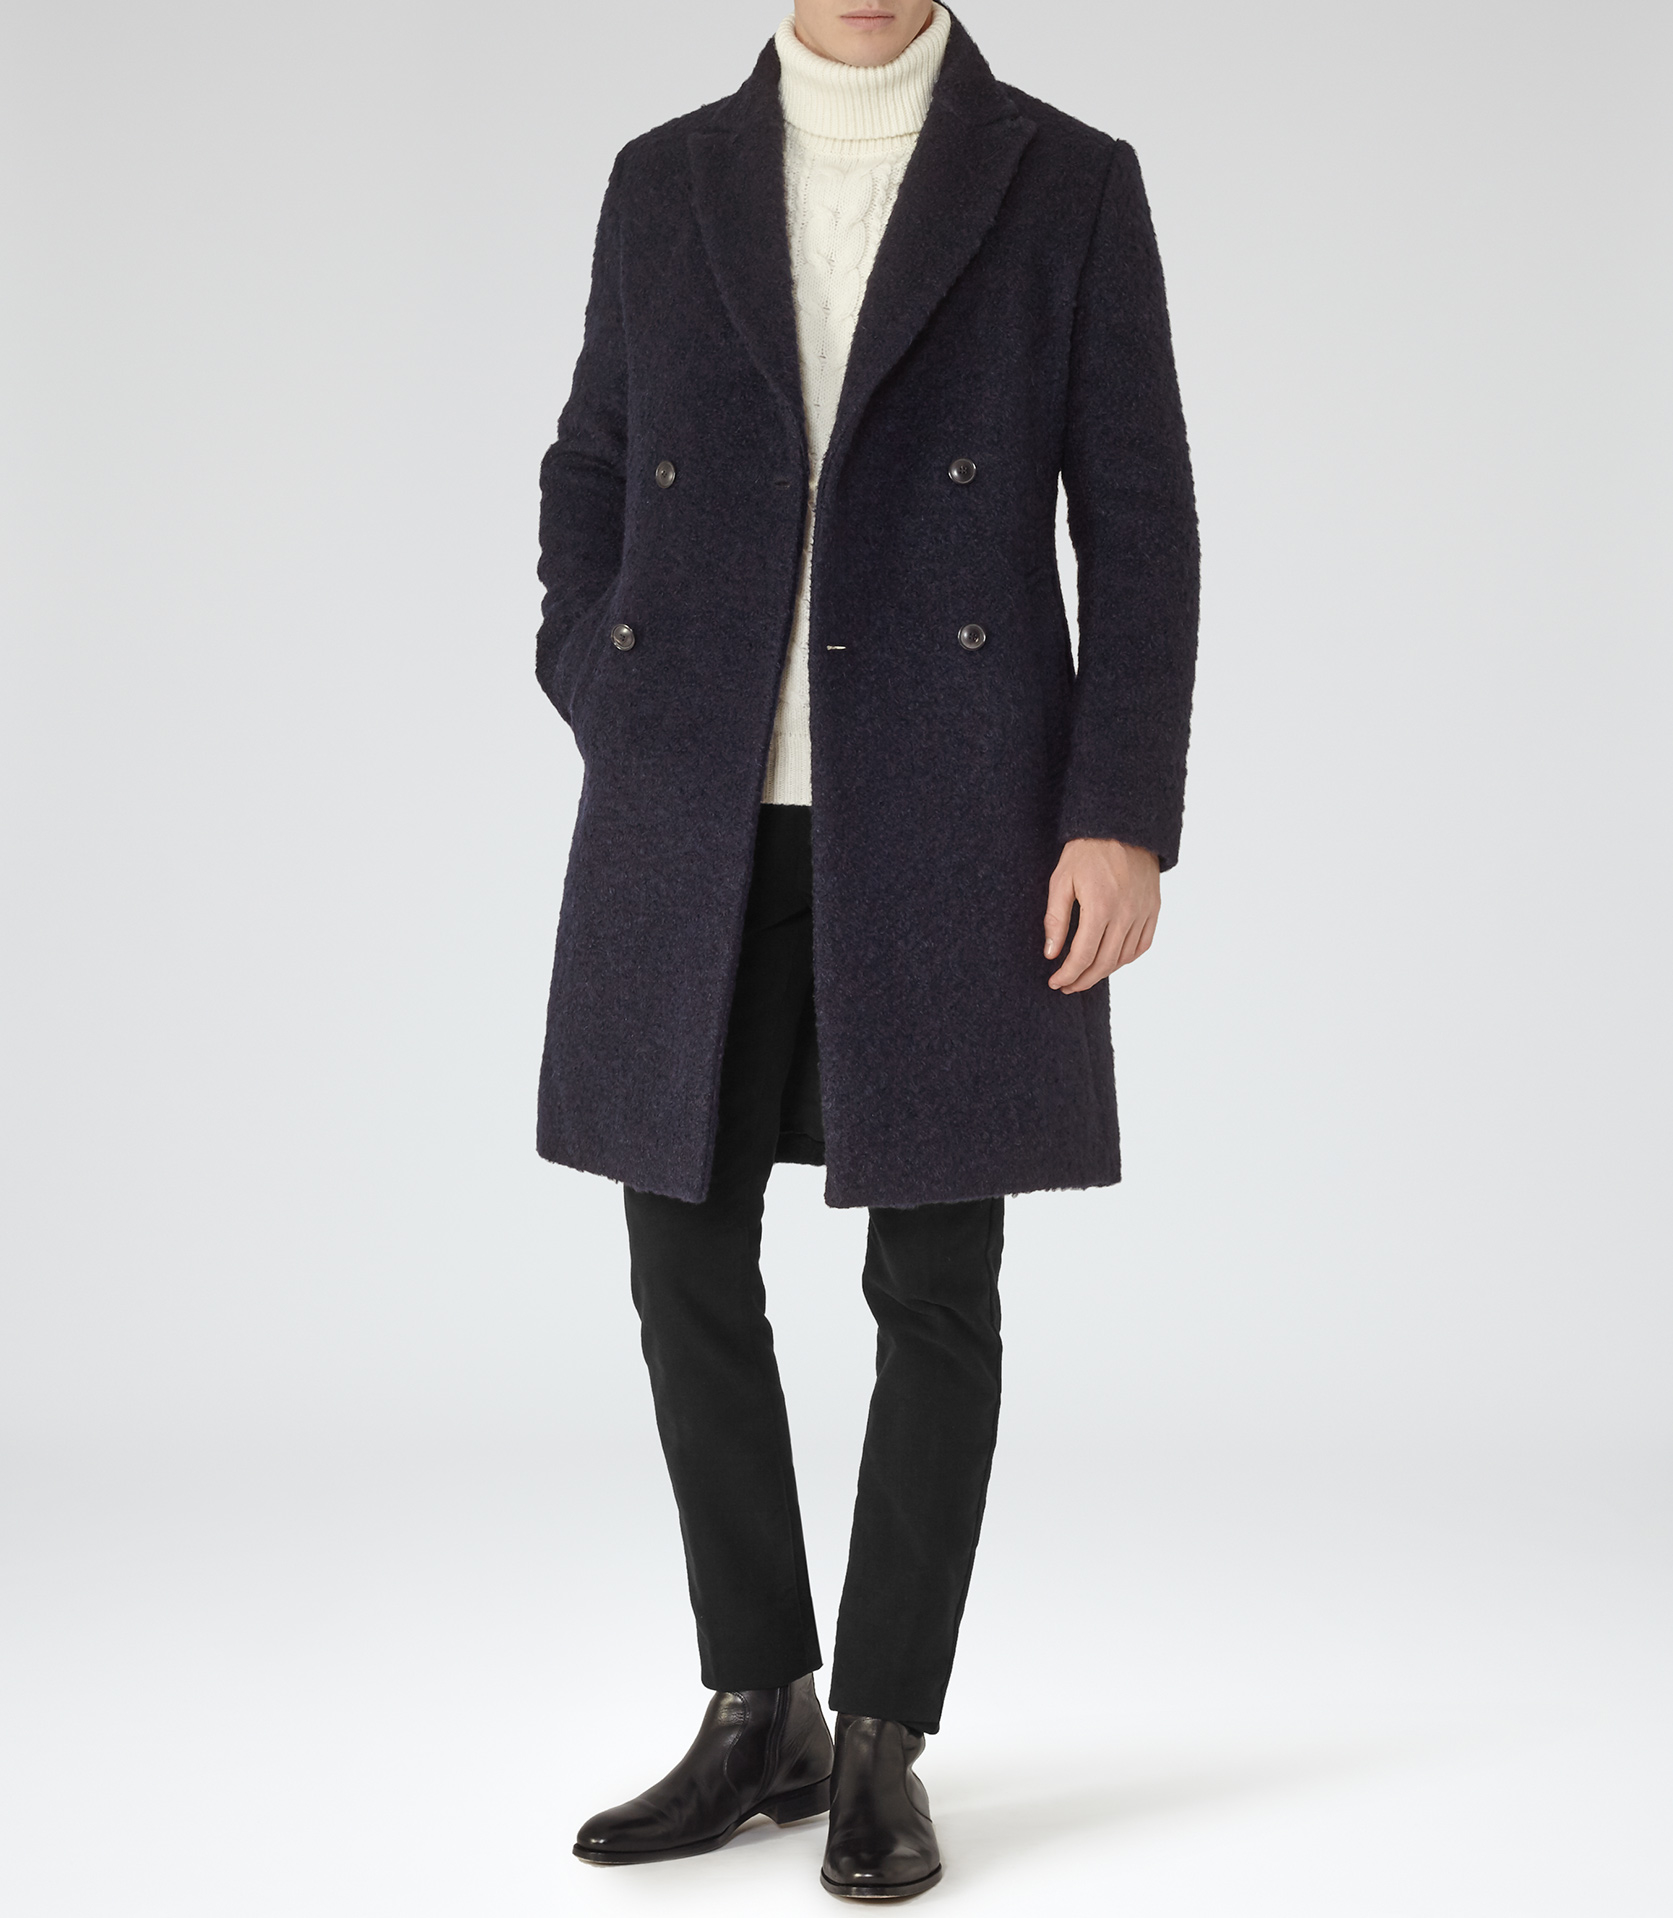 Lyst - Reiss Miles Double-breasted Coat in Blue for Men